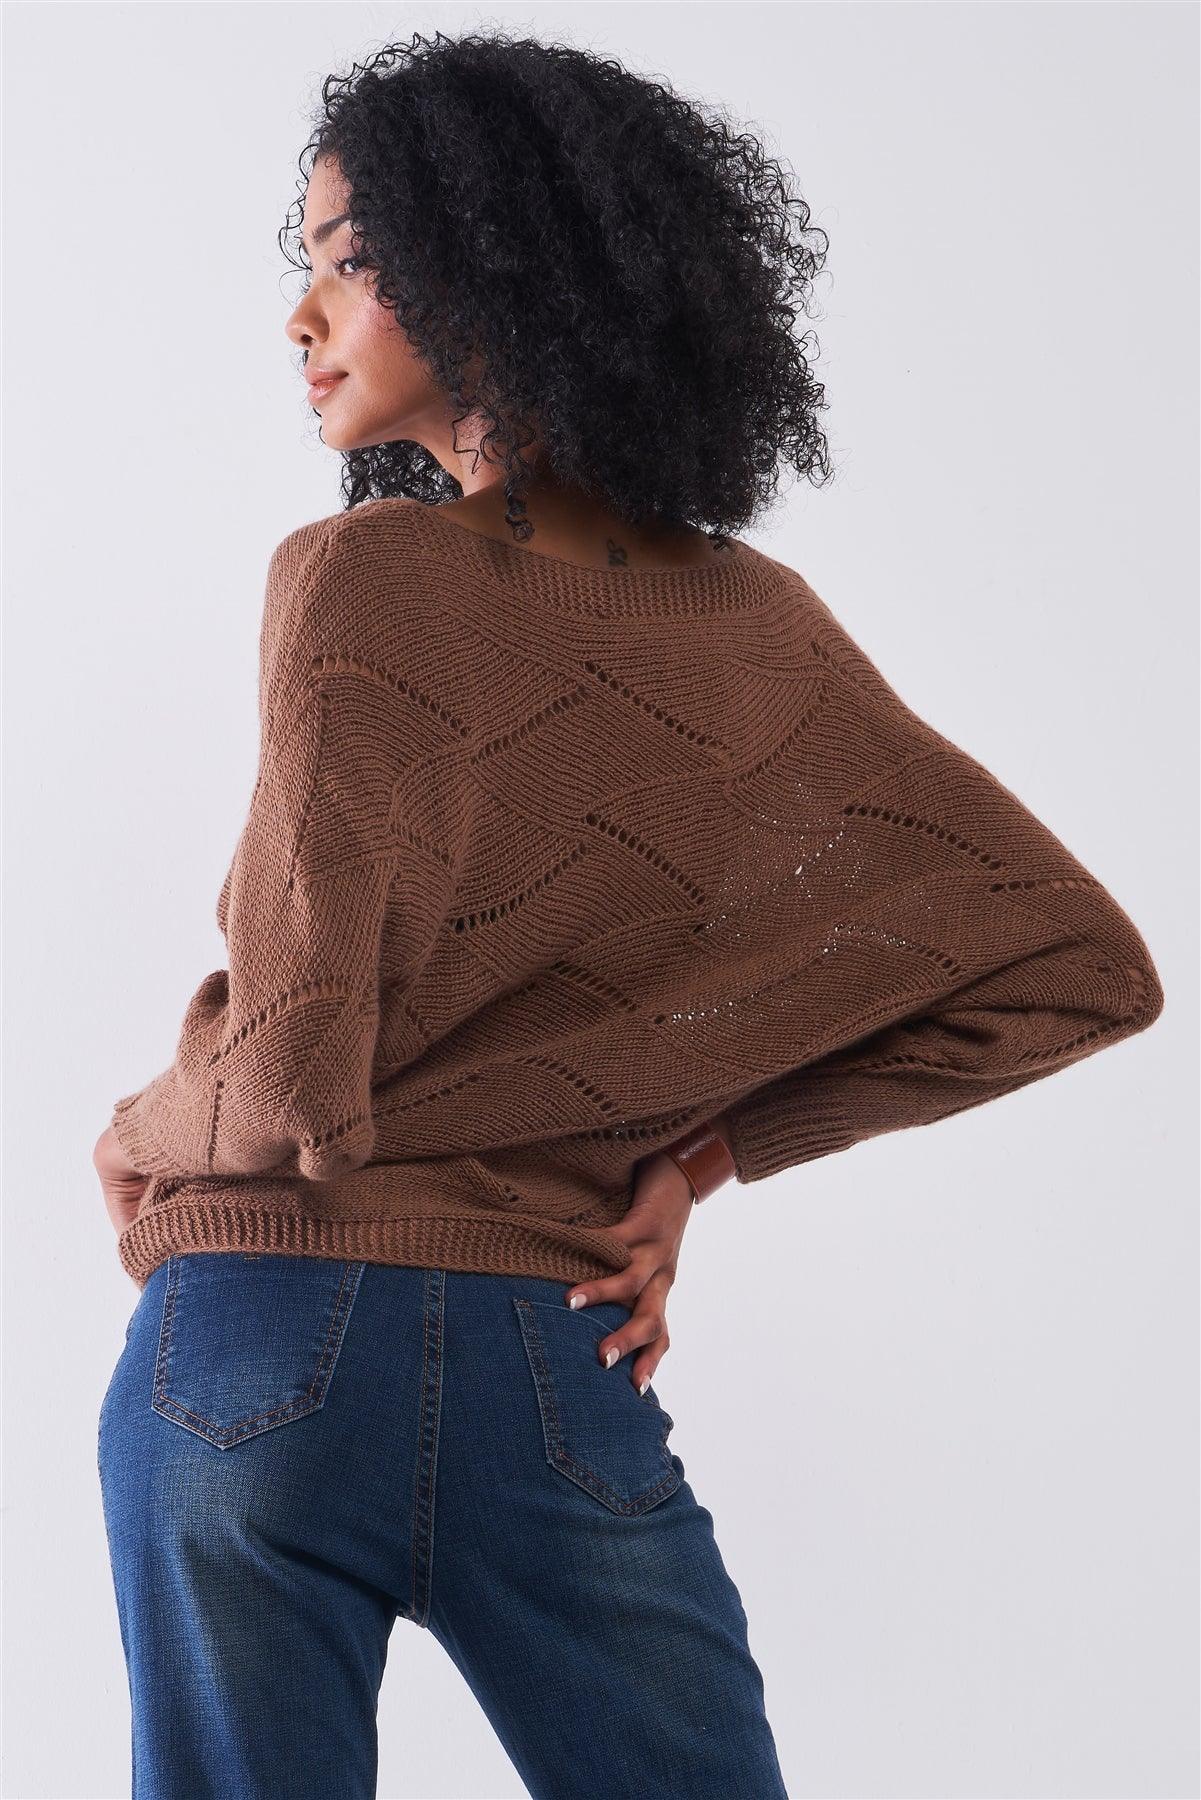 Mocha Brown Cable Knit Mock Neck Long Sleeve Relaxed Sweater /1-2-2-1